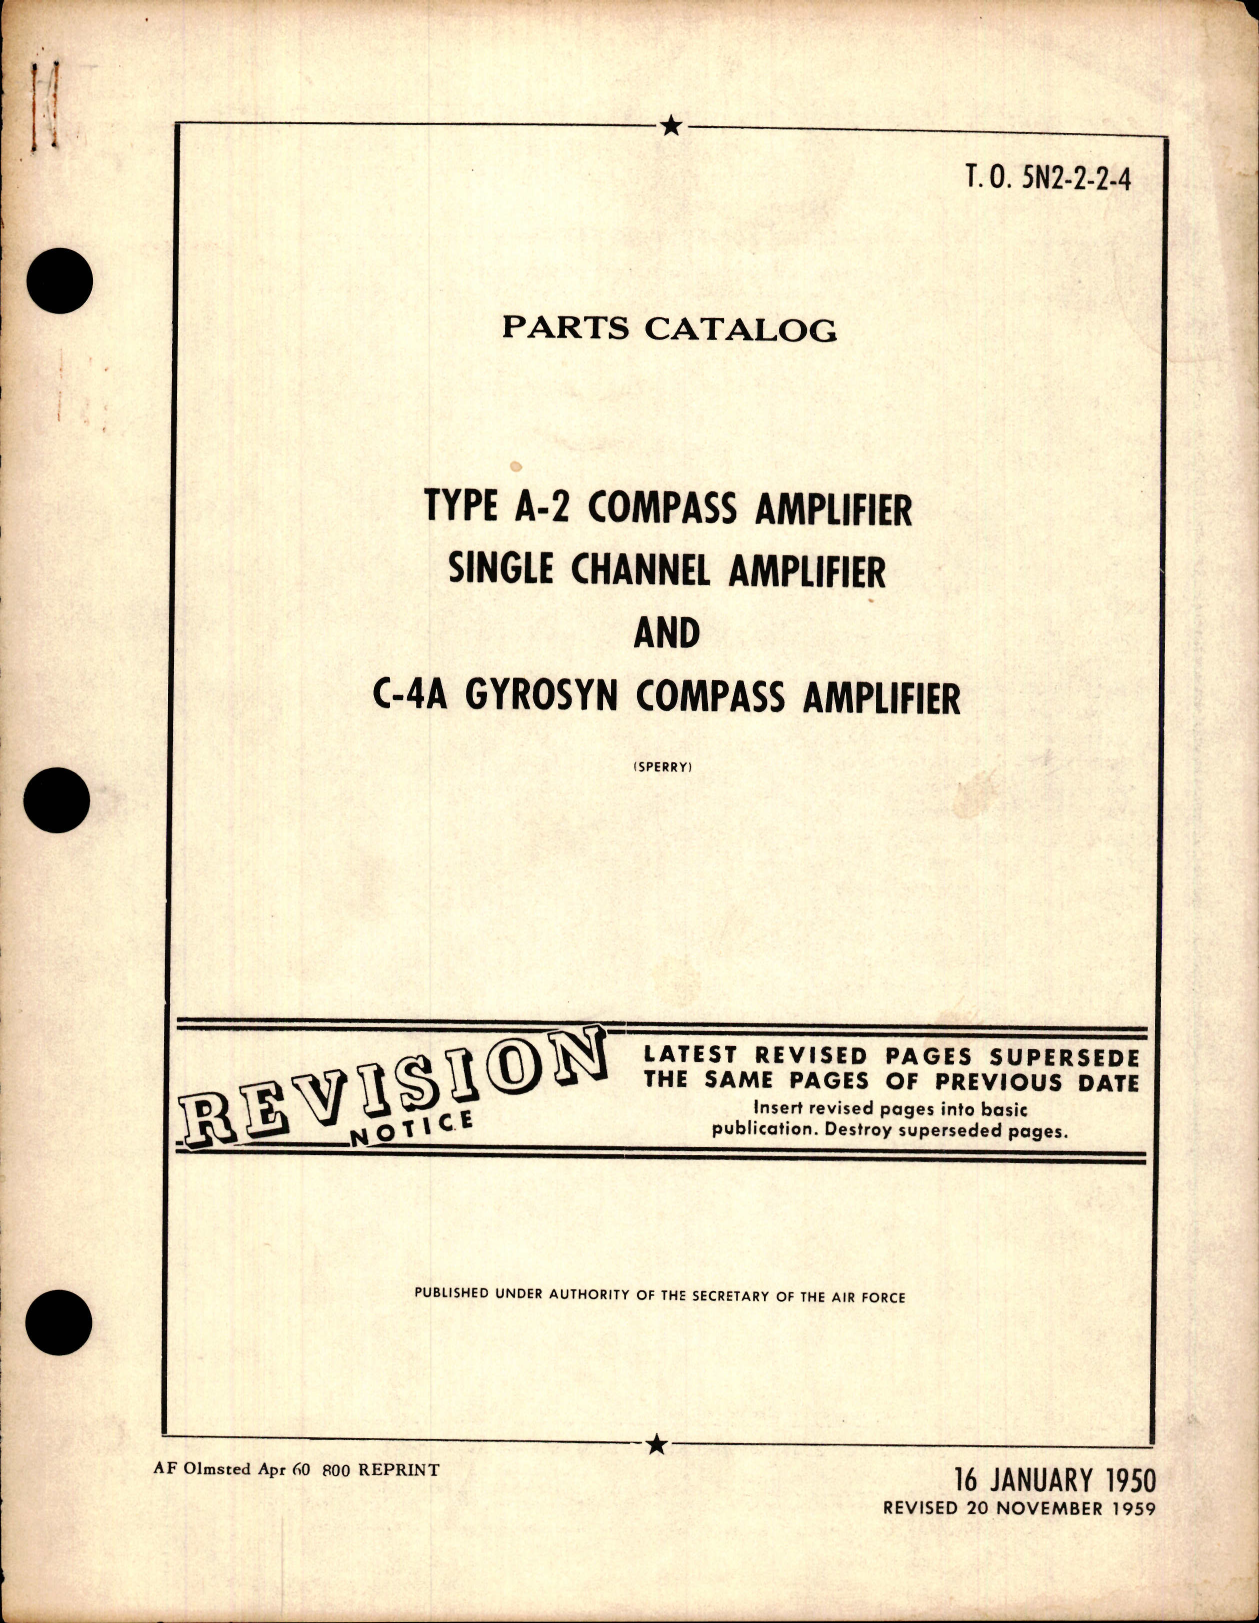 Sample page 1 from AirCorps Library document: Parts Catalog for Type A-2 Compass Amplifier, Single Channel Amplifier, and C-4A Gyrosyn Compass Amplifier